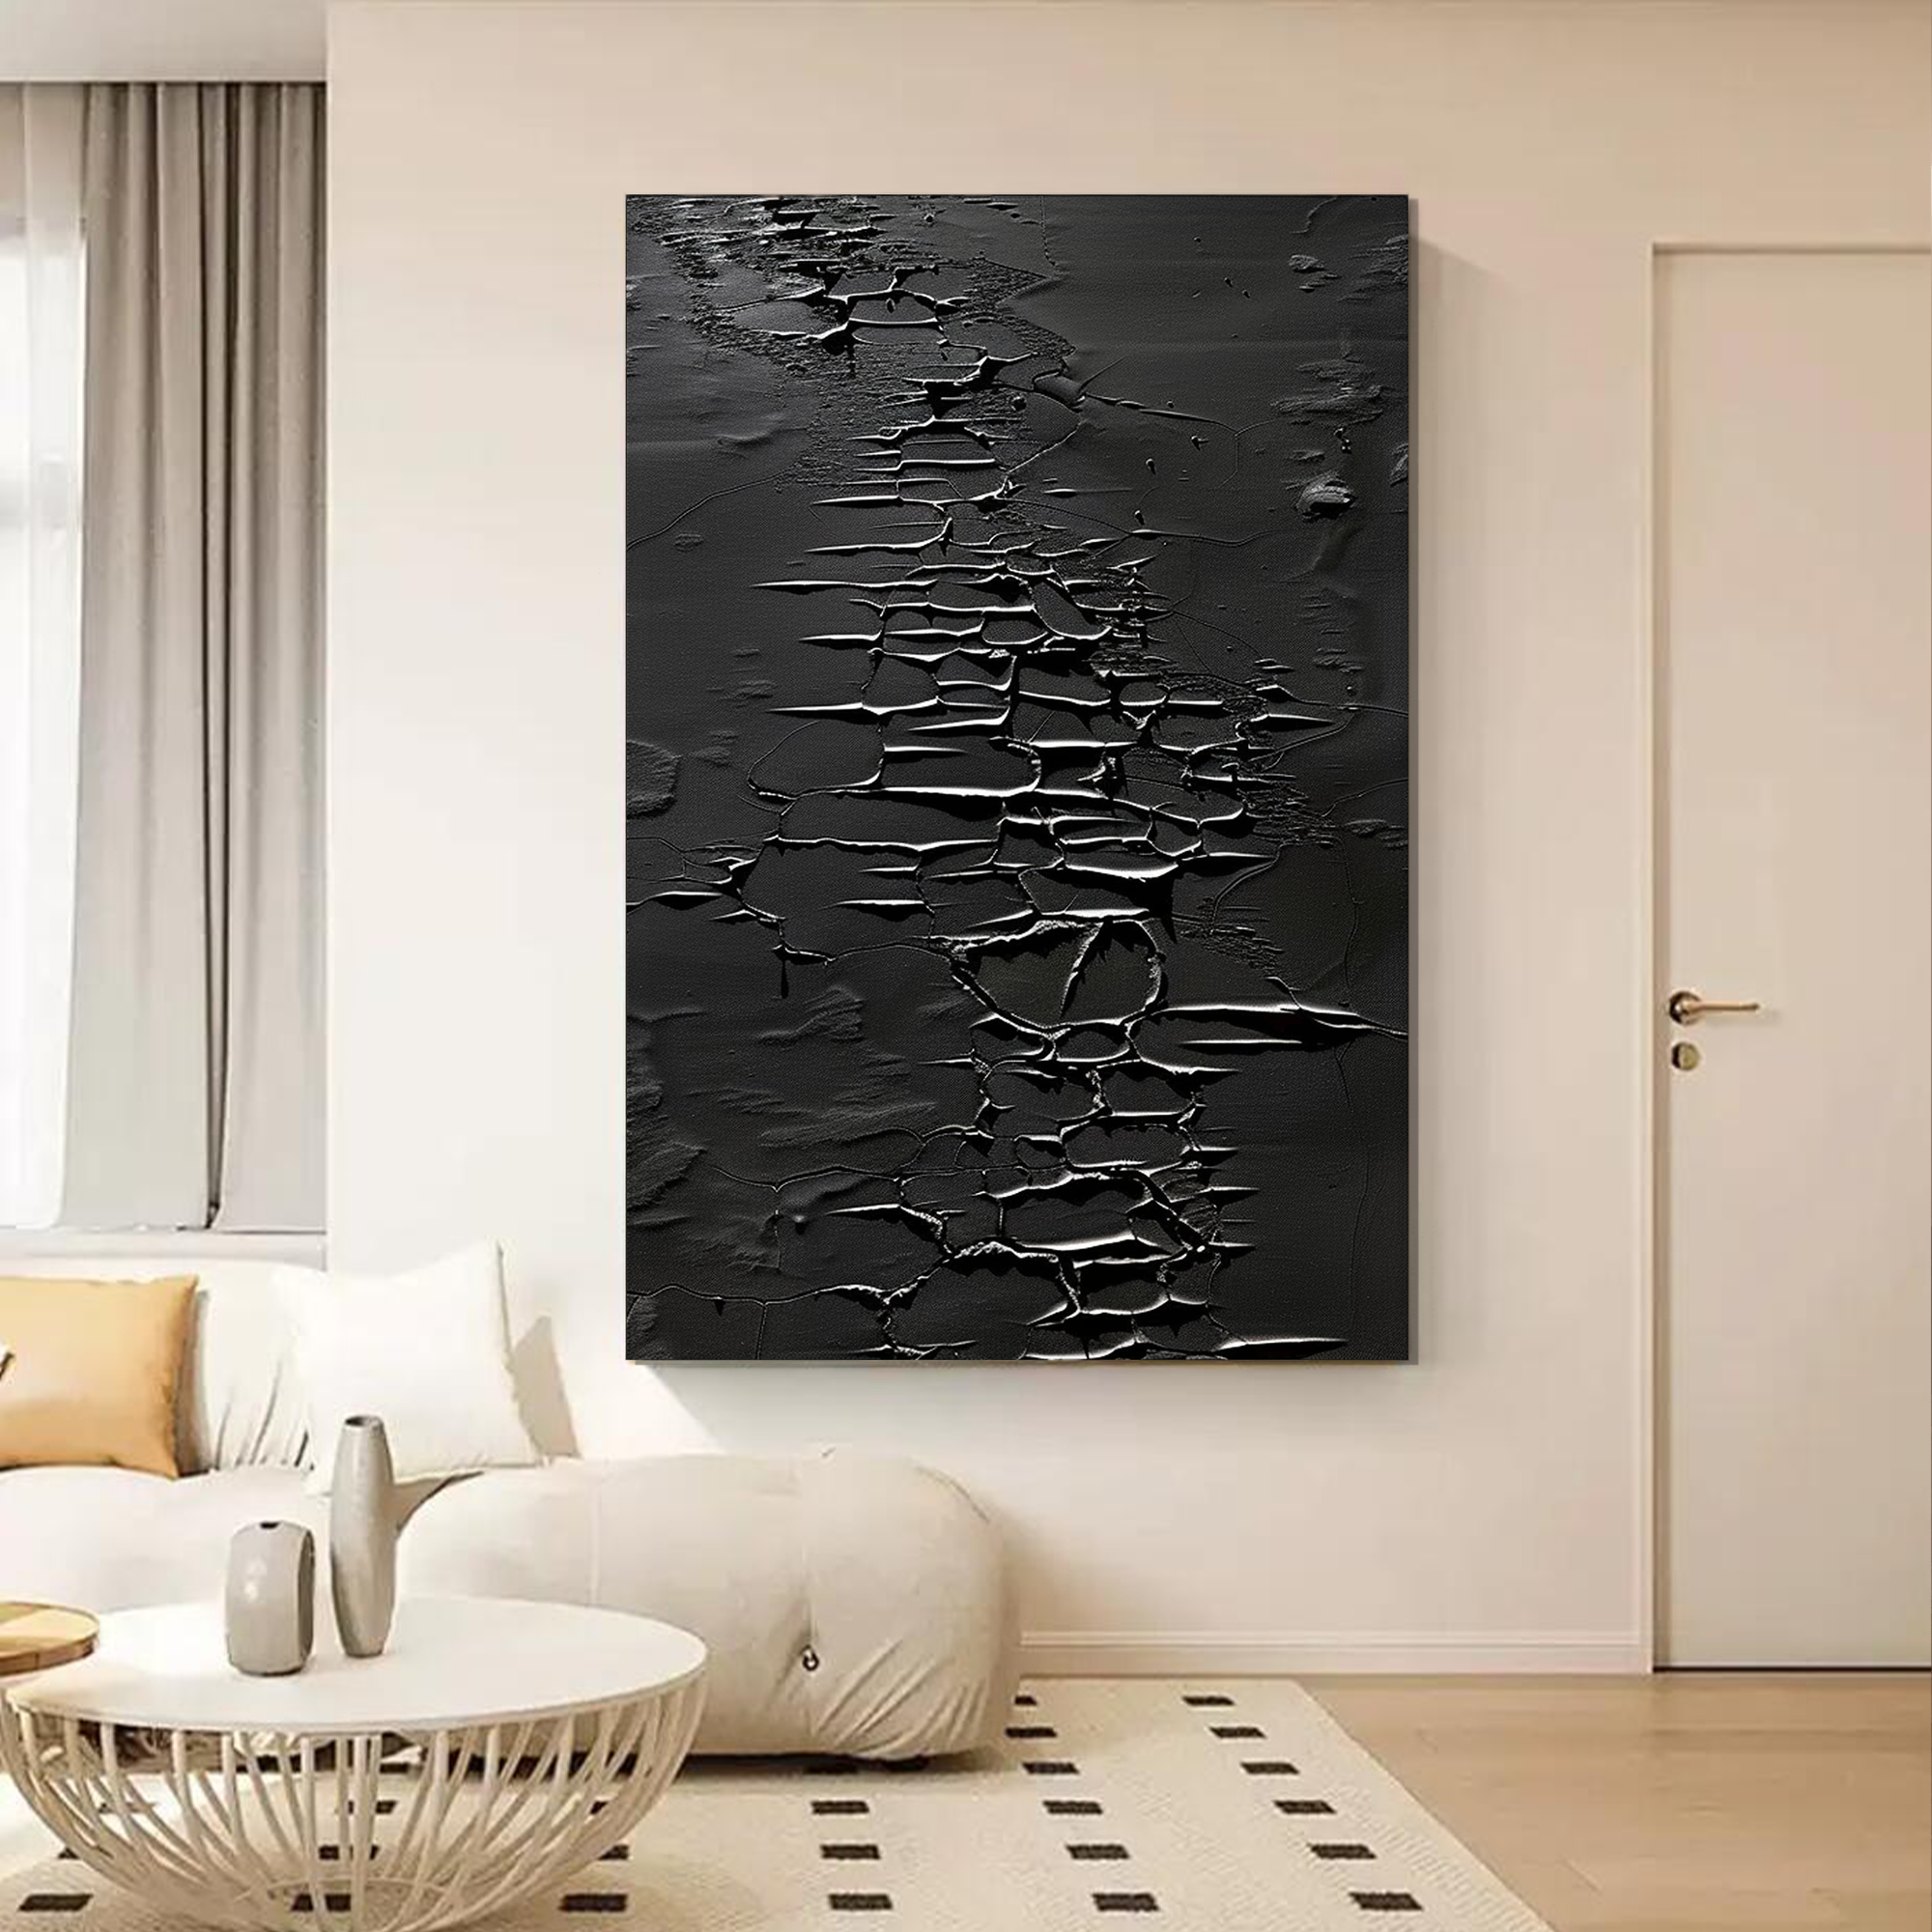 Minimalist Plaster Painting "Whispers of the Night"